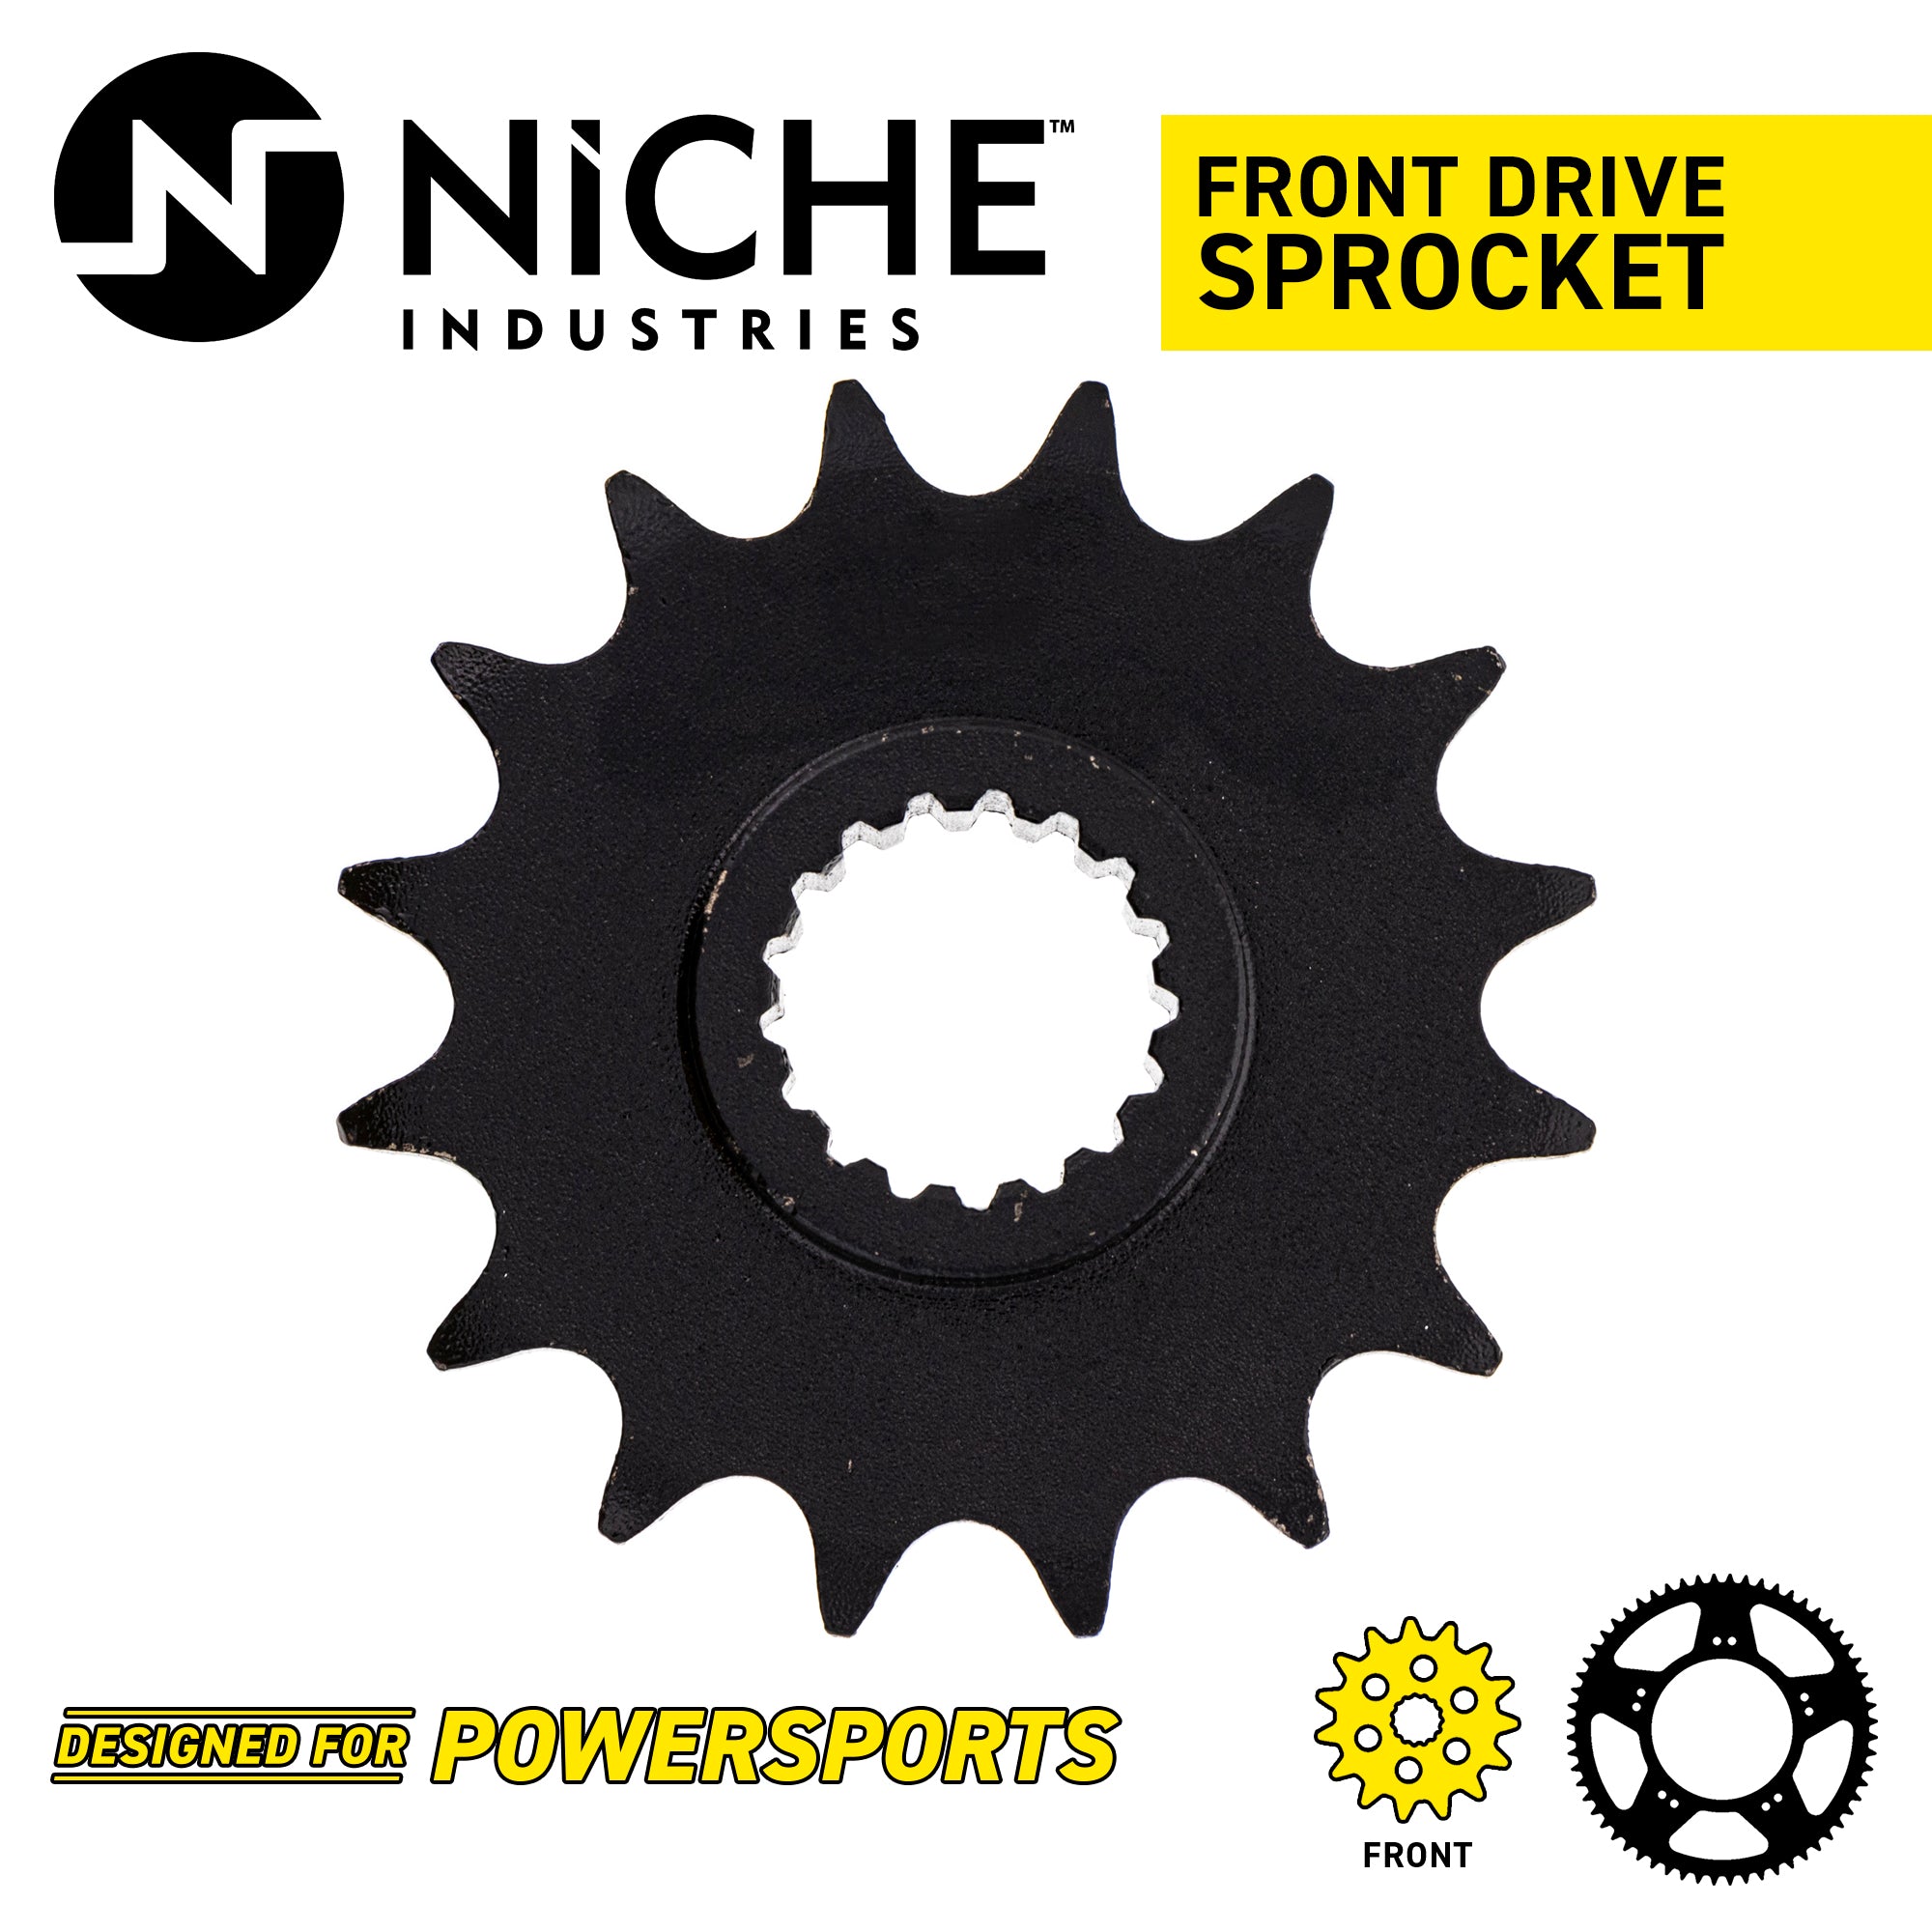 Sprocket Chain Set for BMW F800GS Trophy 16/42 Tooth 525 Rear Front